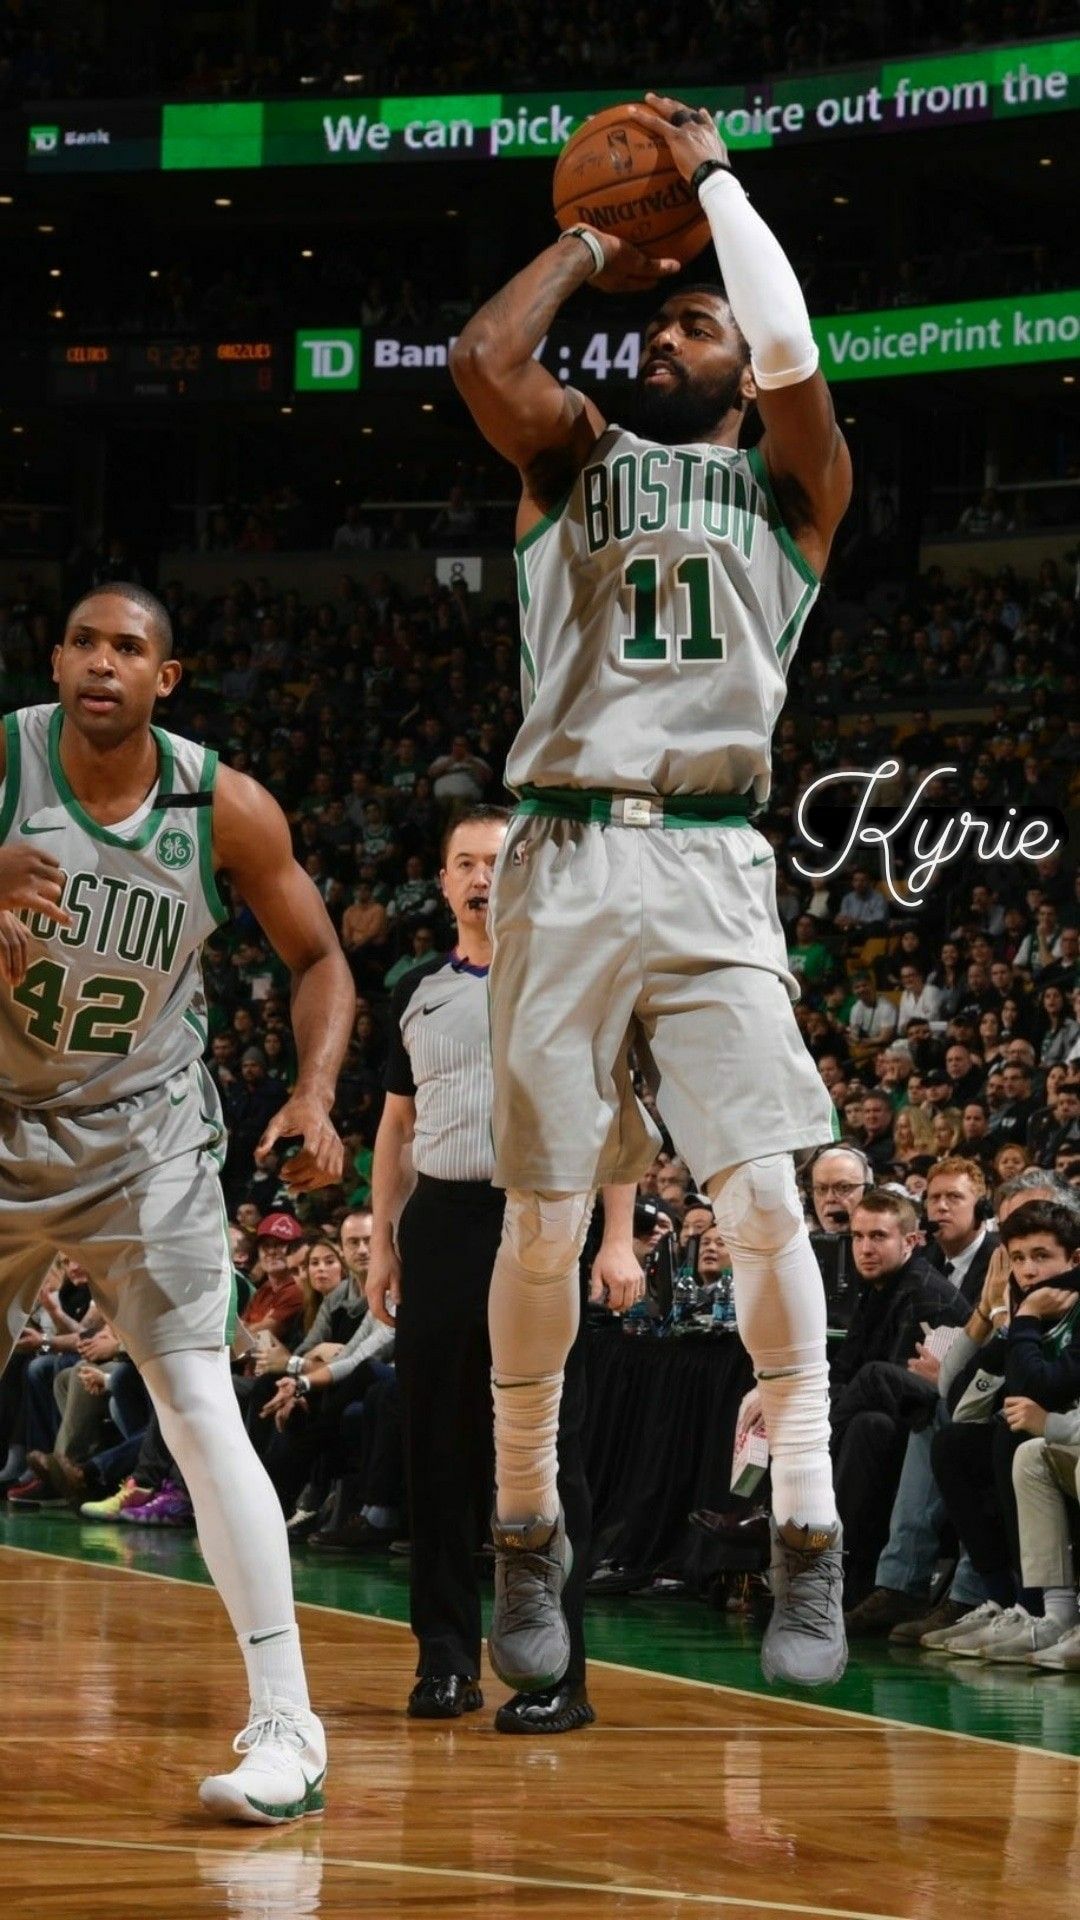 kyrie irving live wallpaper,basketball player,jersey,sports collectible,basketball,basketball moves